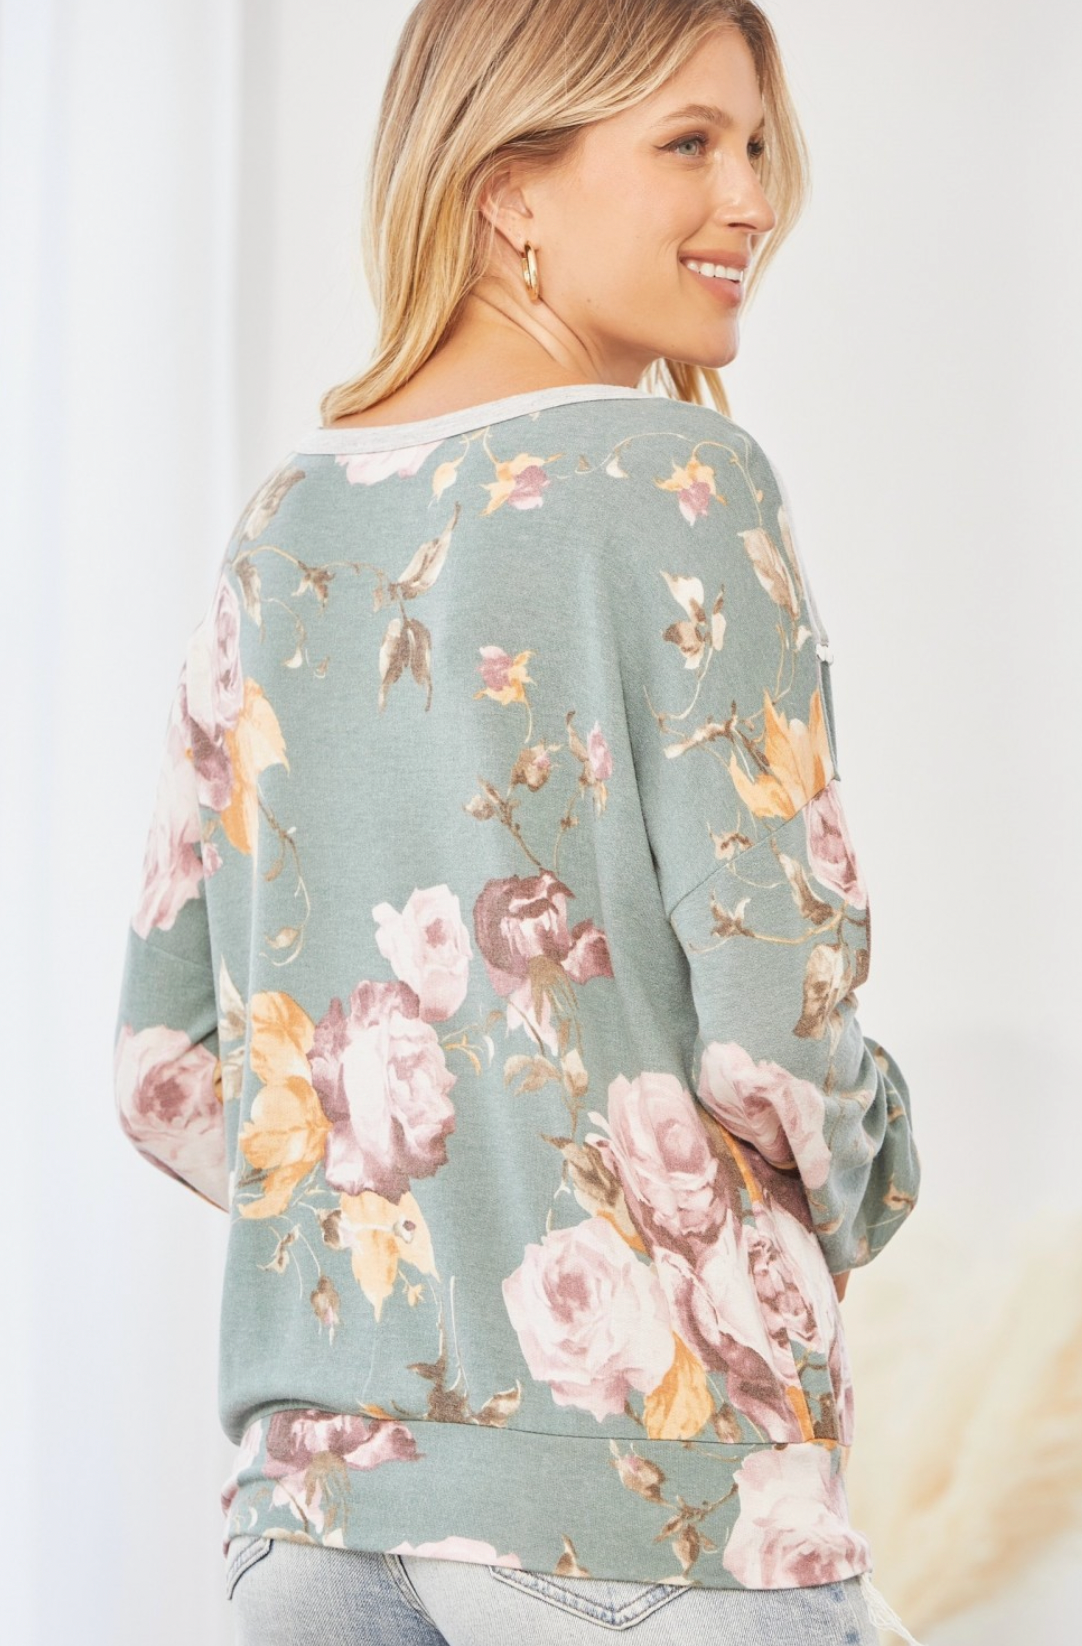 Andree by Unit- Tunic Top in Teal Grey Floral